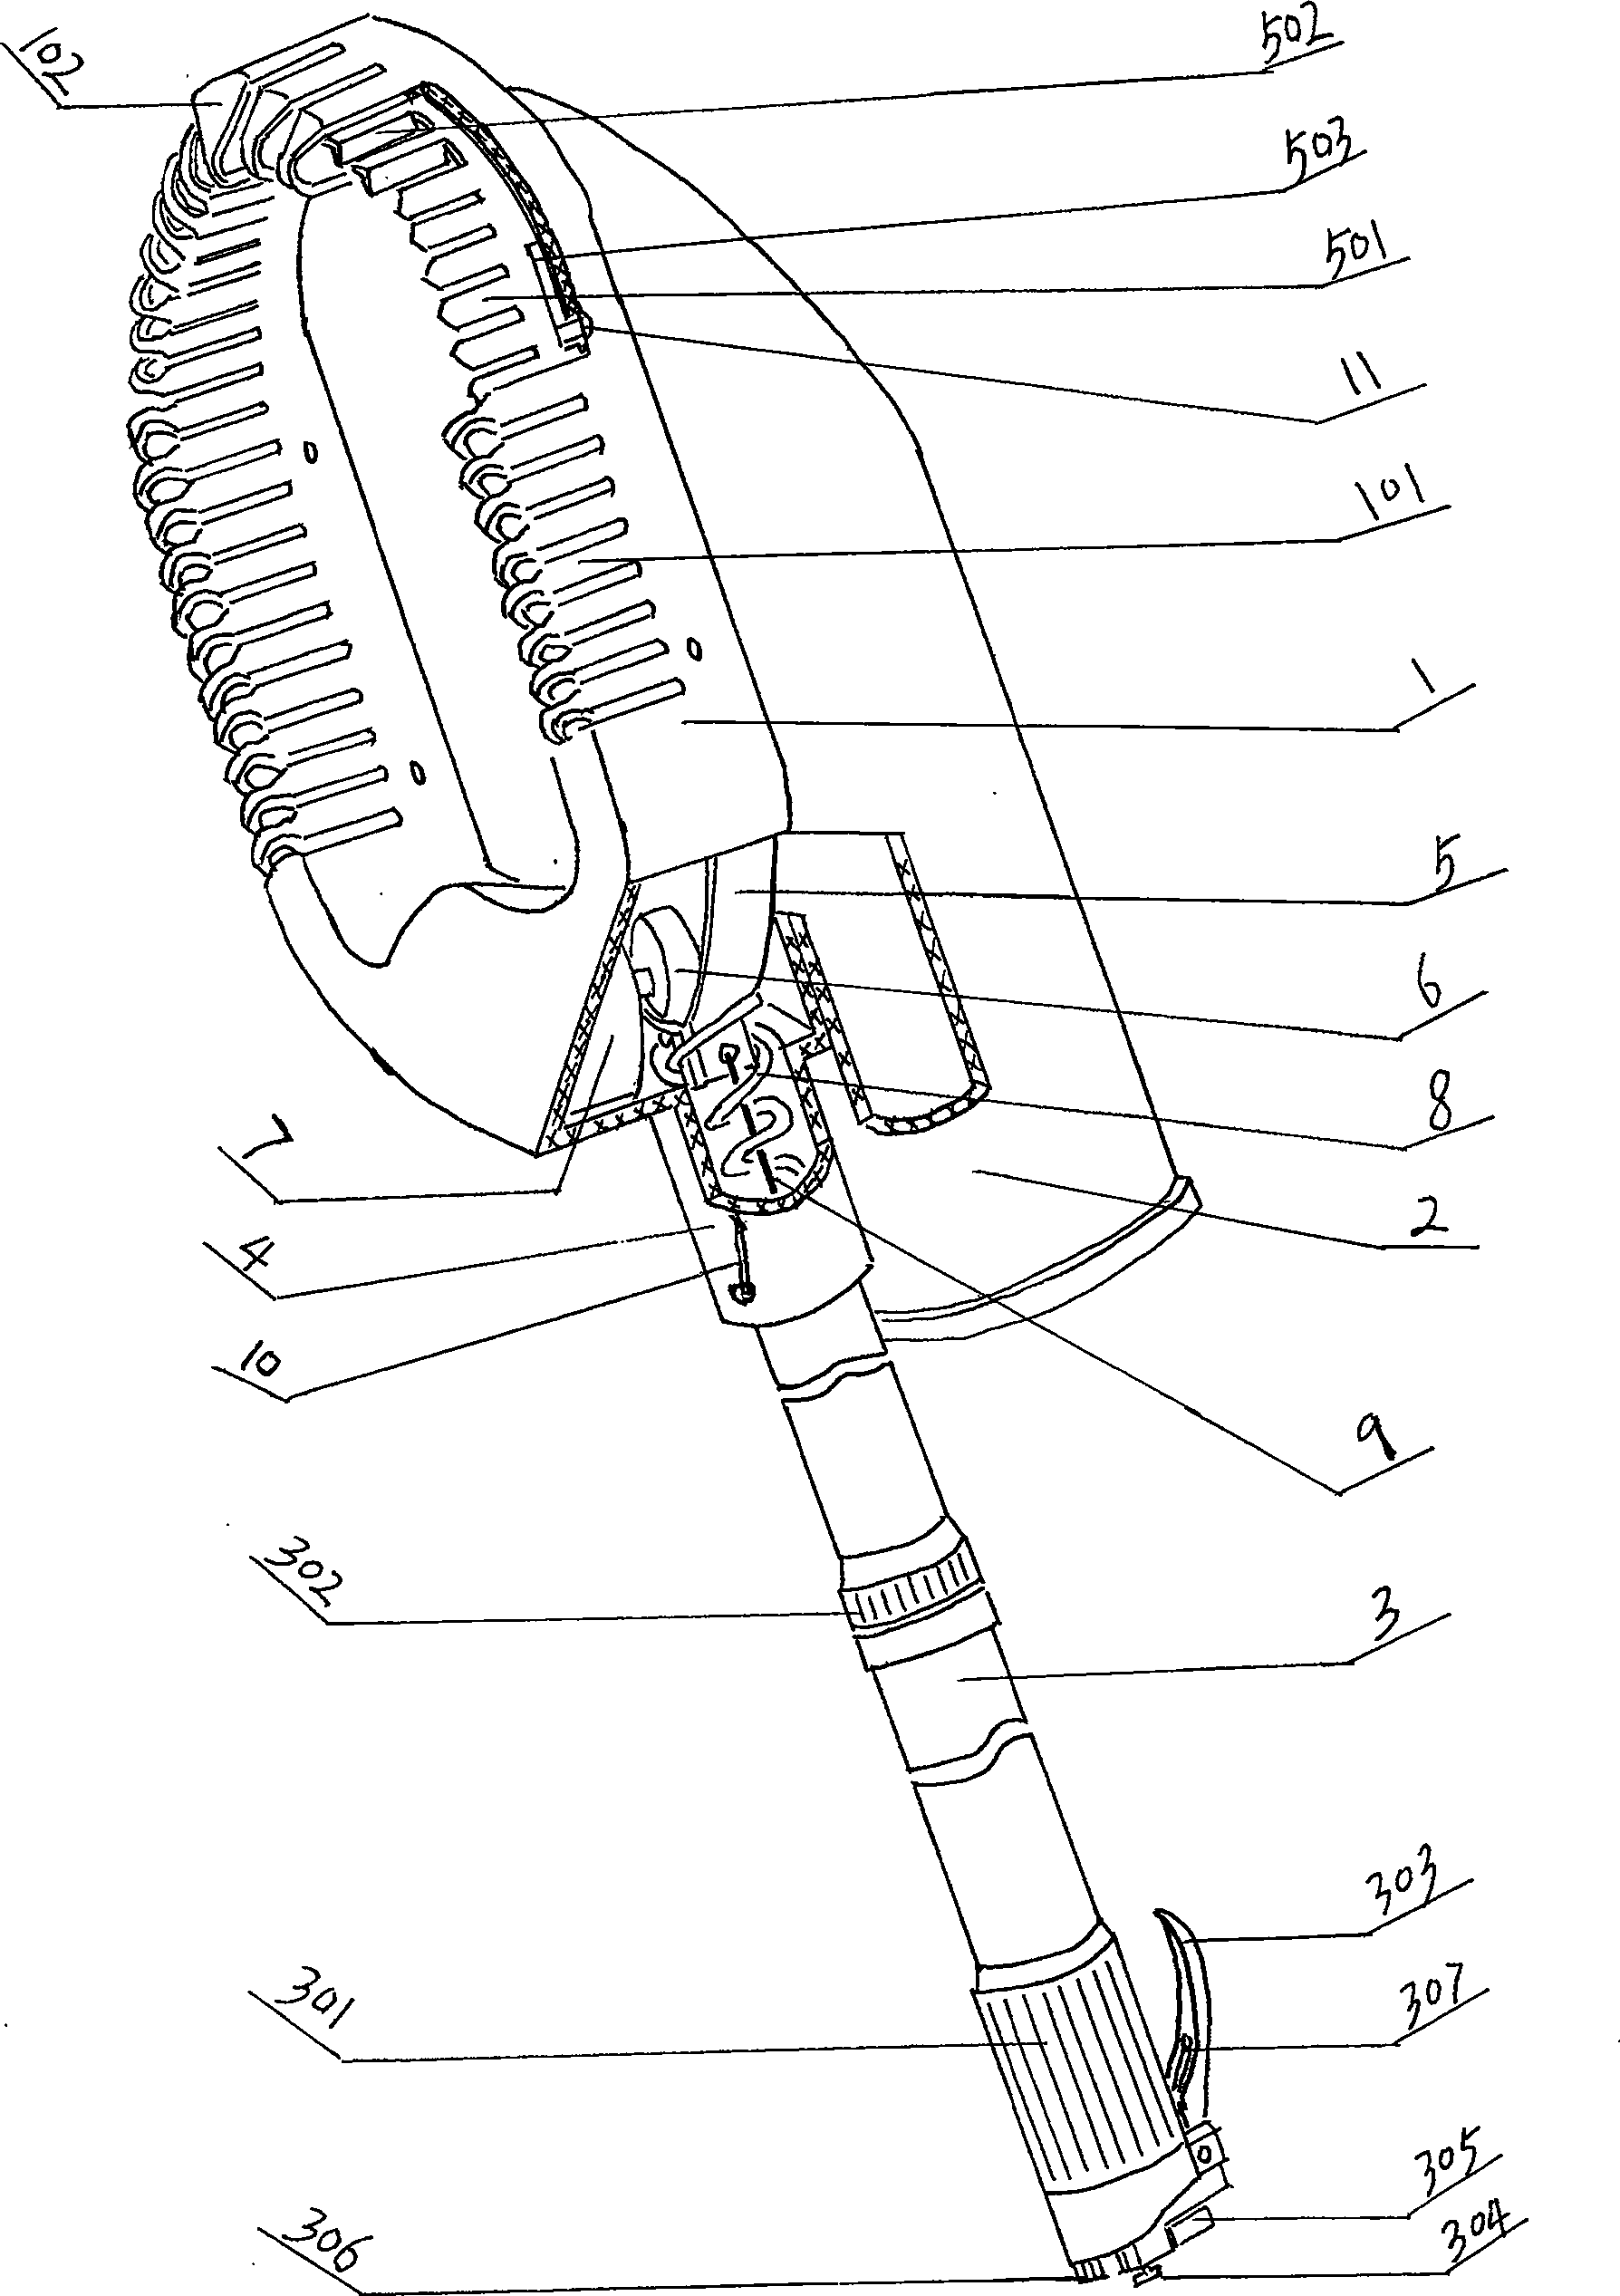 Electric and hand-operated multidirectional fruit picking device